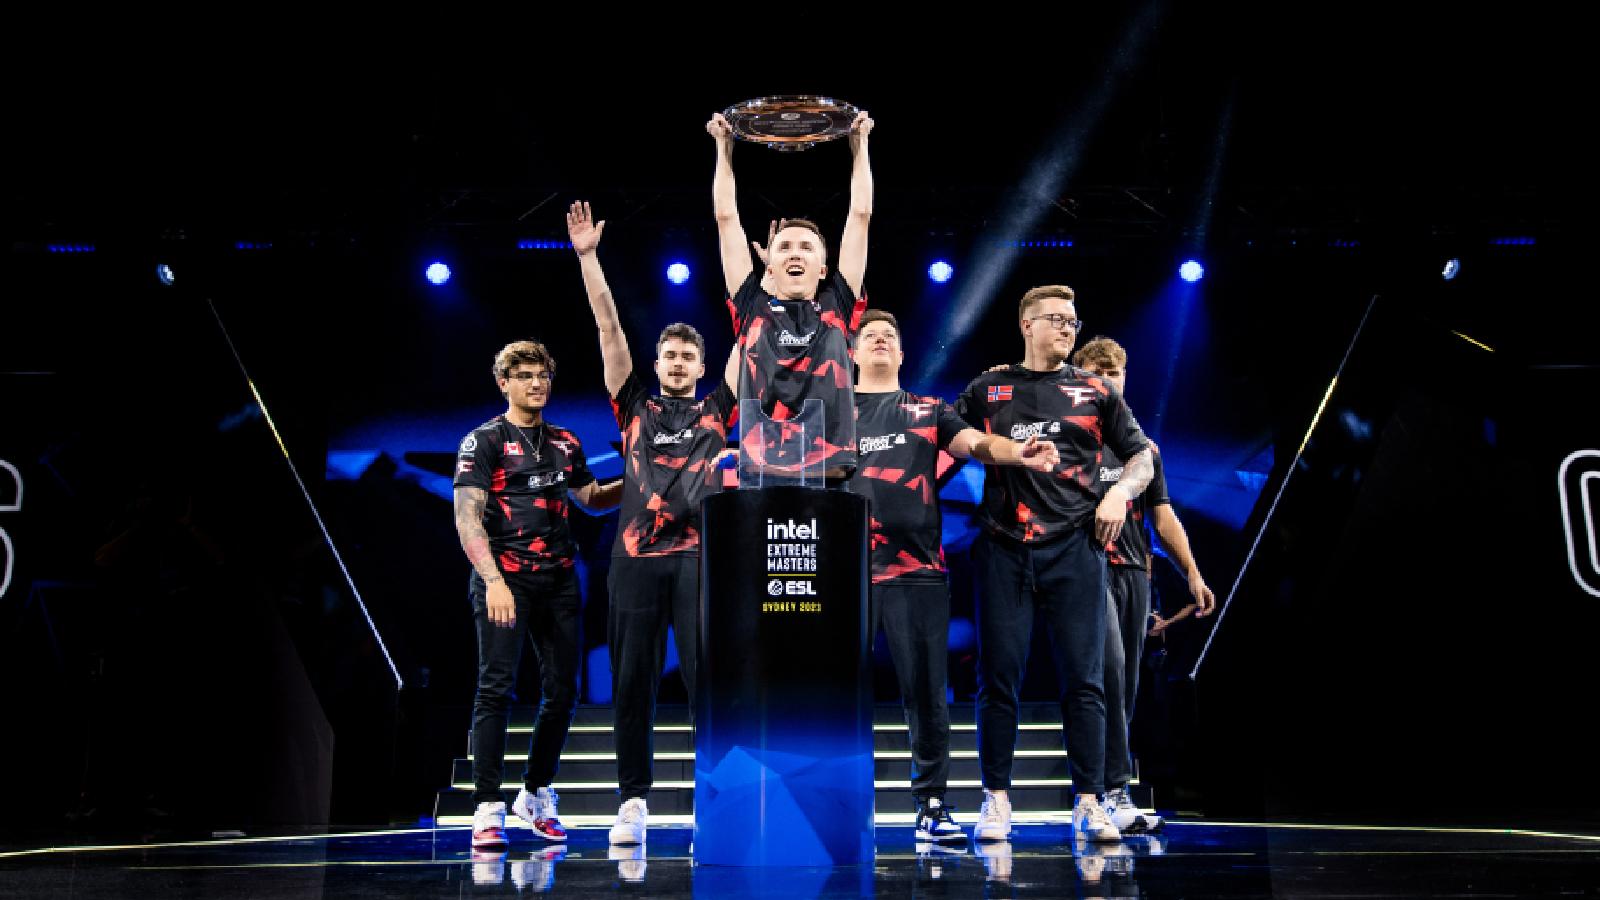 After a phenomenal CS:GO Major, Intel® Extreme Masters is set to